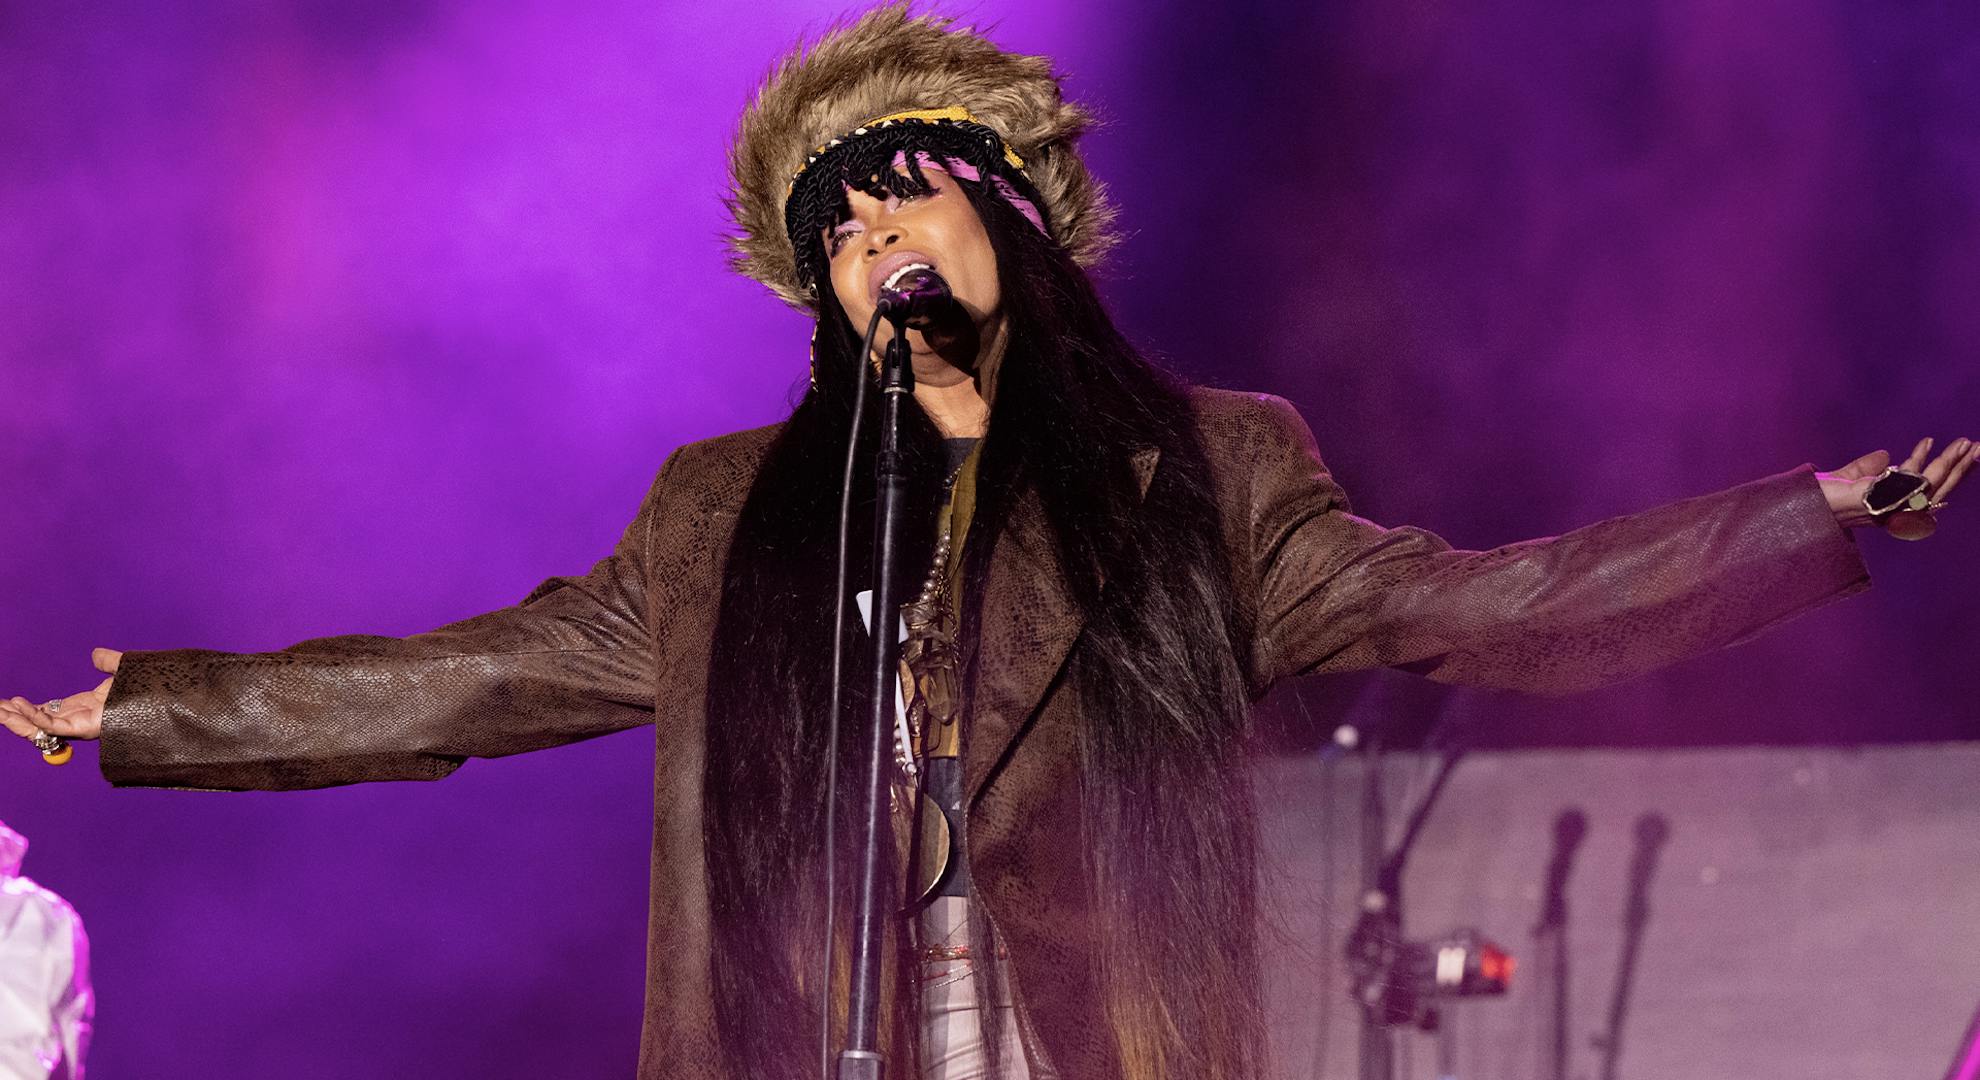 Singer Erykah Badu performs onstage during the Smokin Grooves Festival at Los Angeles State Historic Park on March 19, 2022 in Los Angeles, California. (Photo by Scott Dudelson/Getty Images)